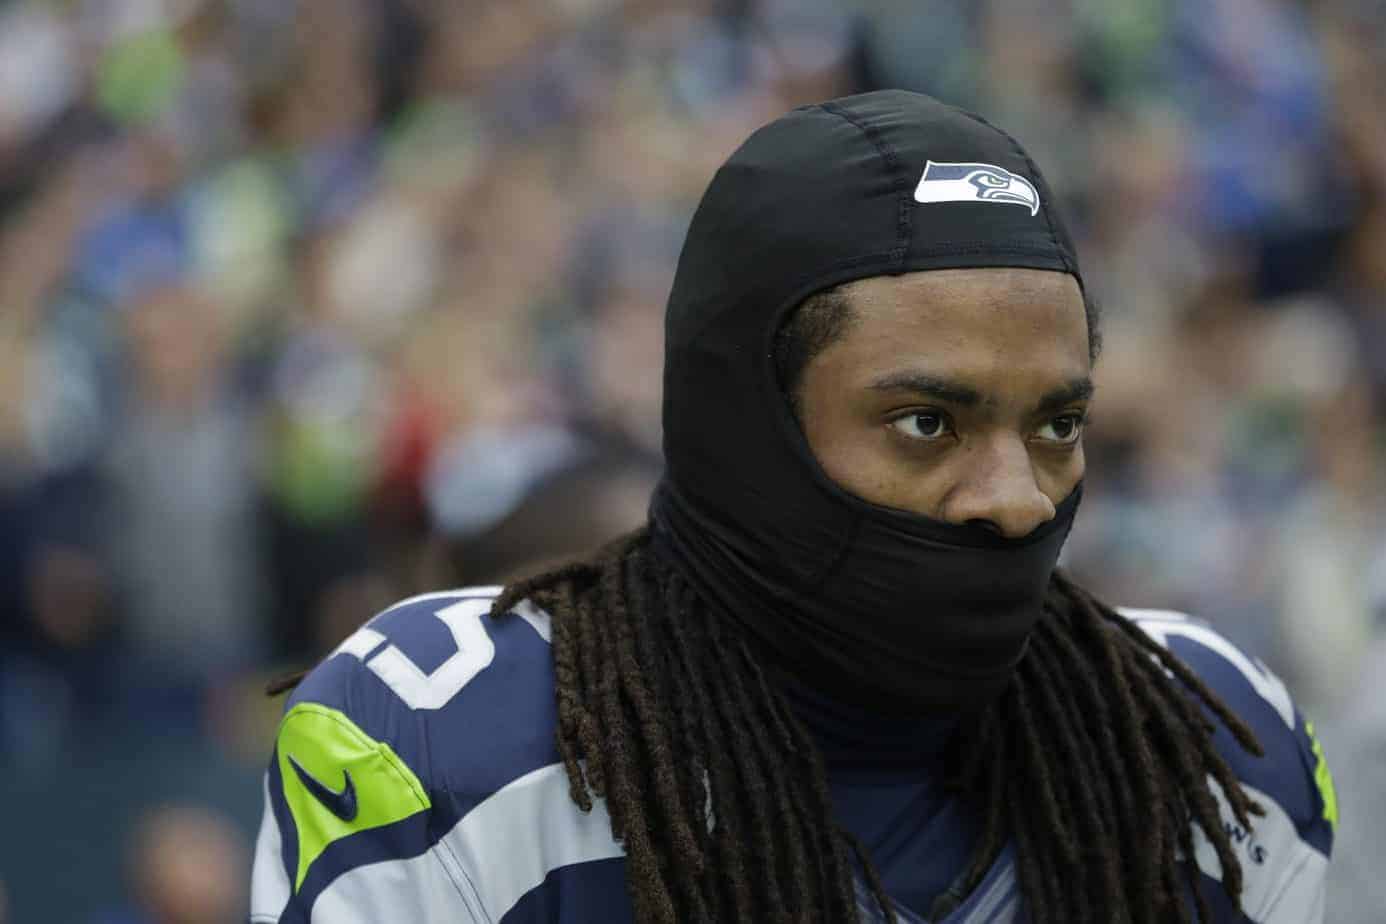 The 911 dispatcher who answered Richard Sherman's wife, Ashley Moss, on Wednesday morning is under fire for her questionable response